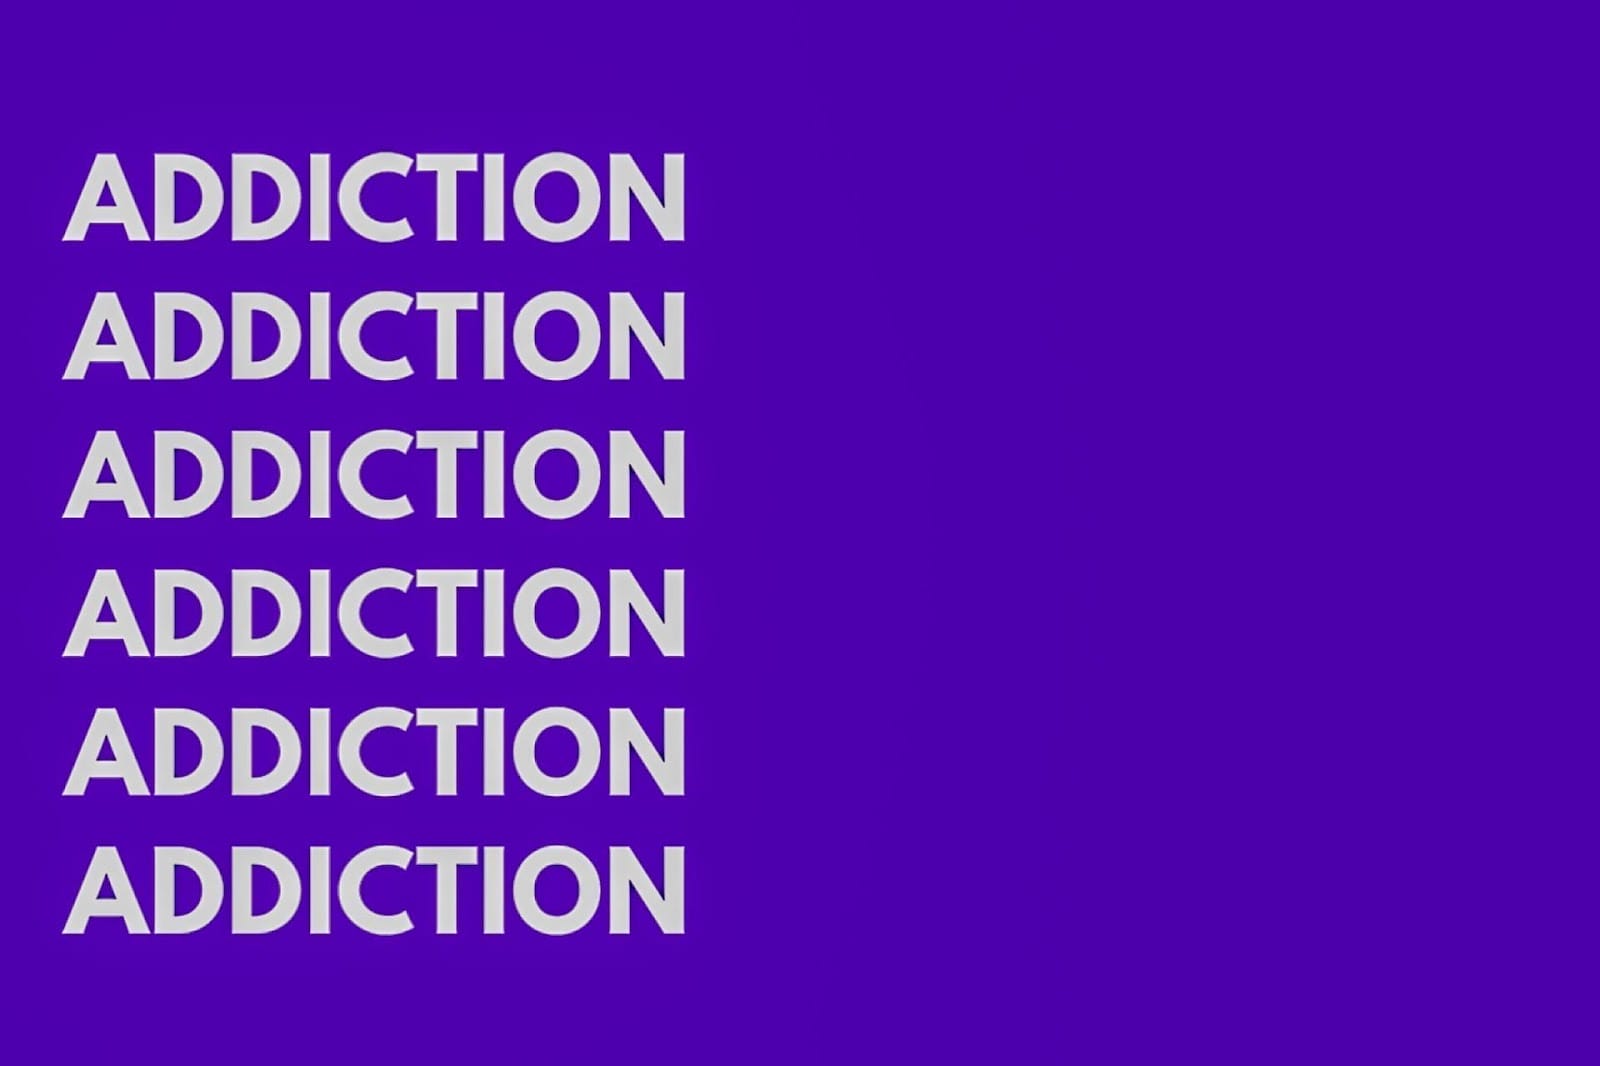 A Purple Graphic Showing The Word Addiction 6 Times